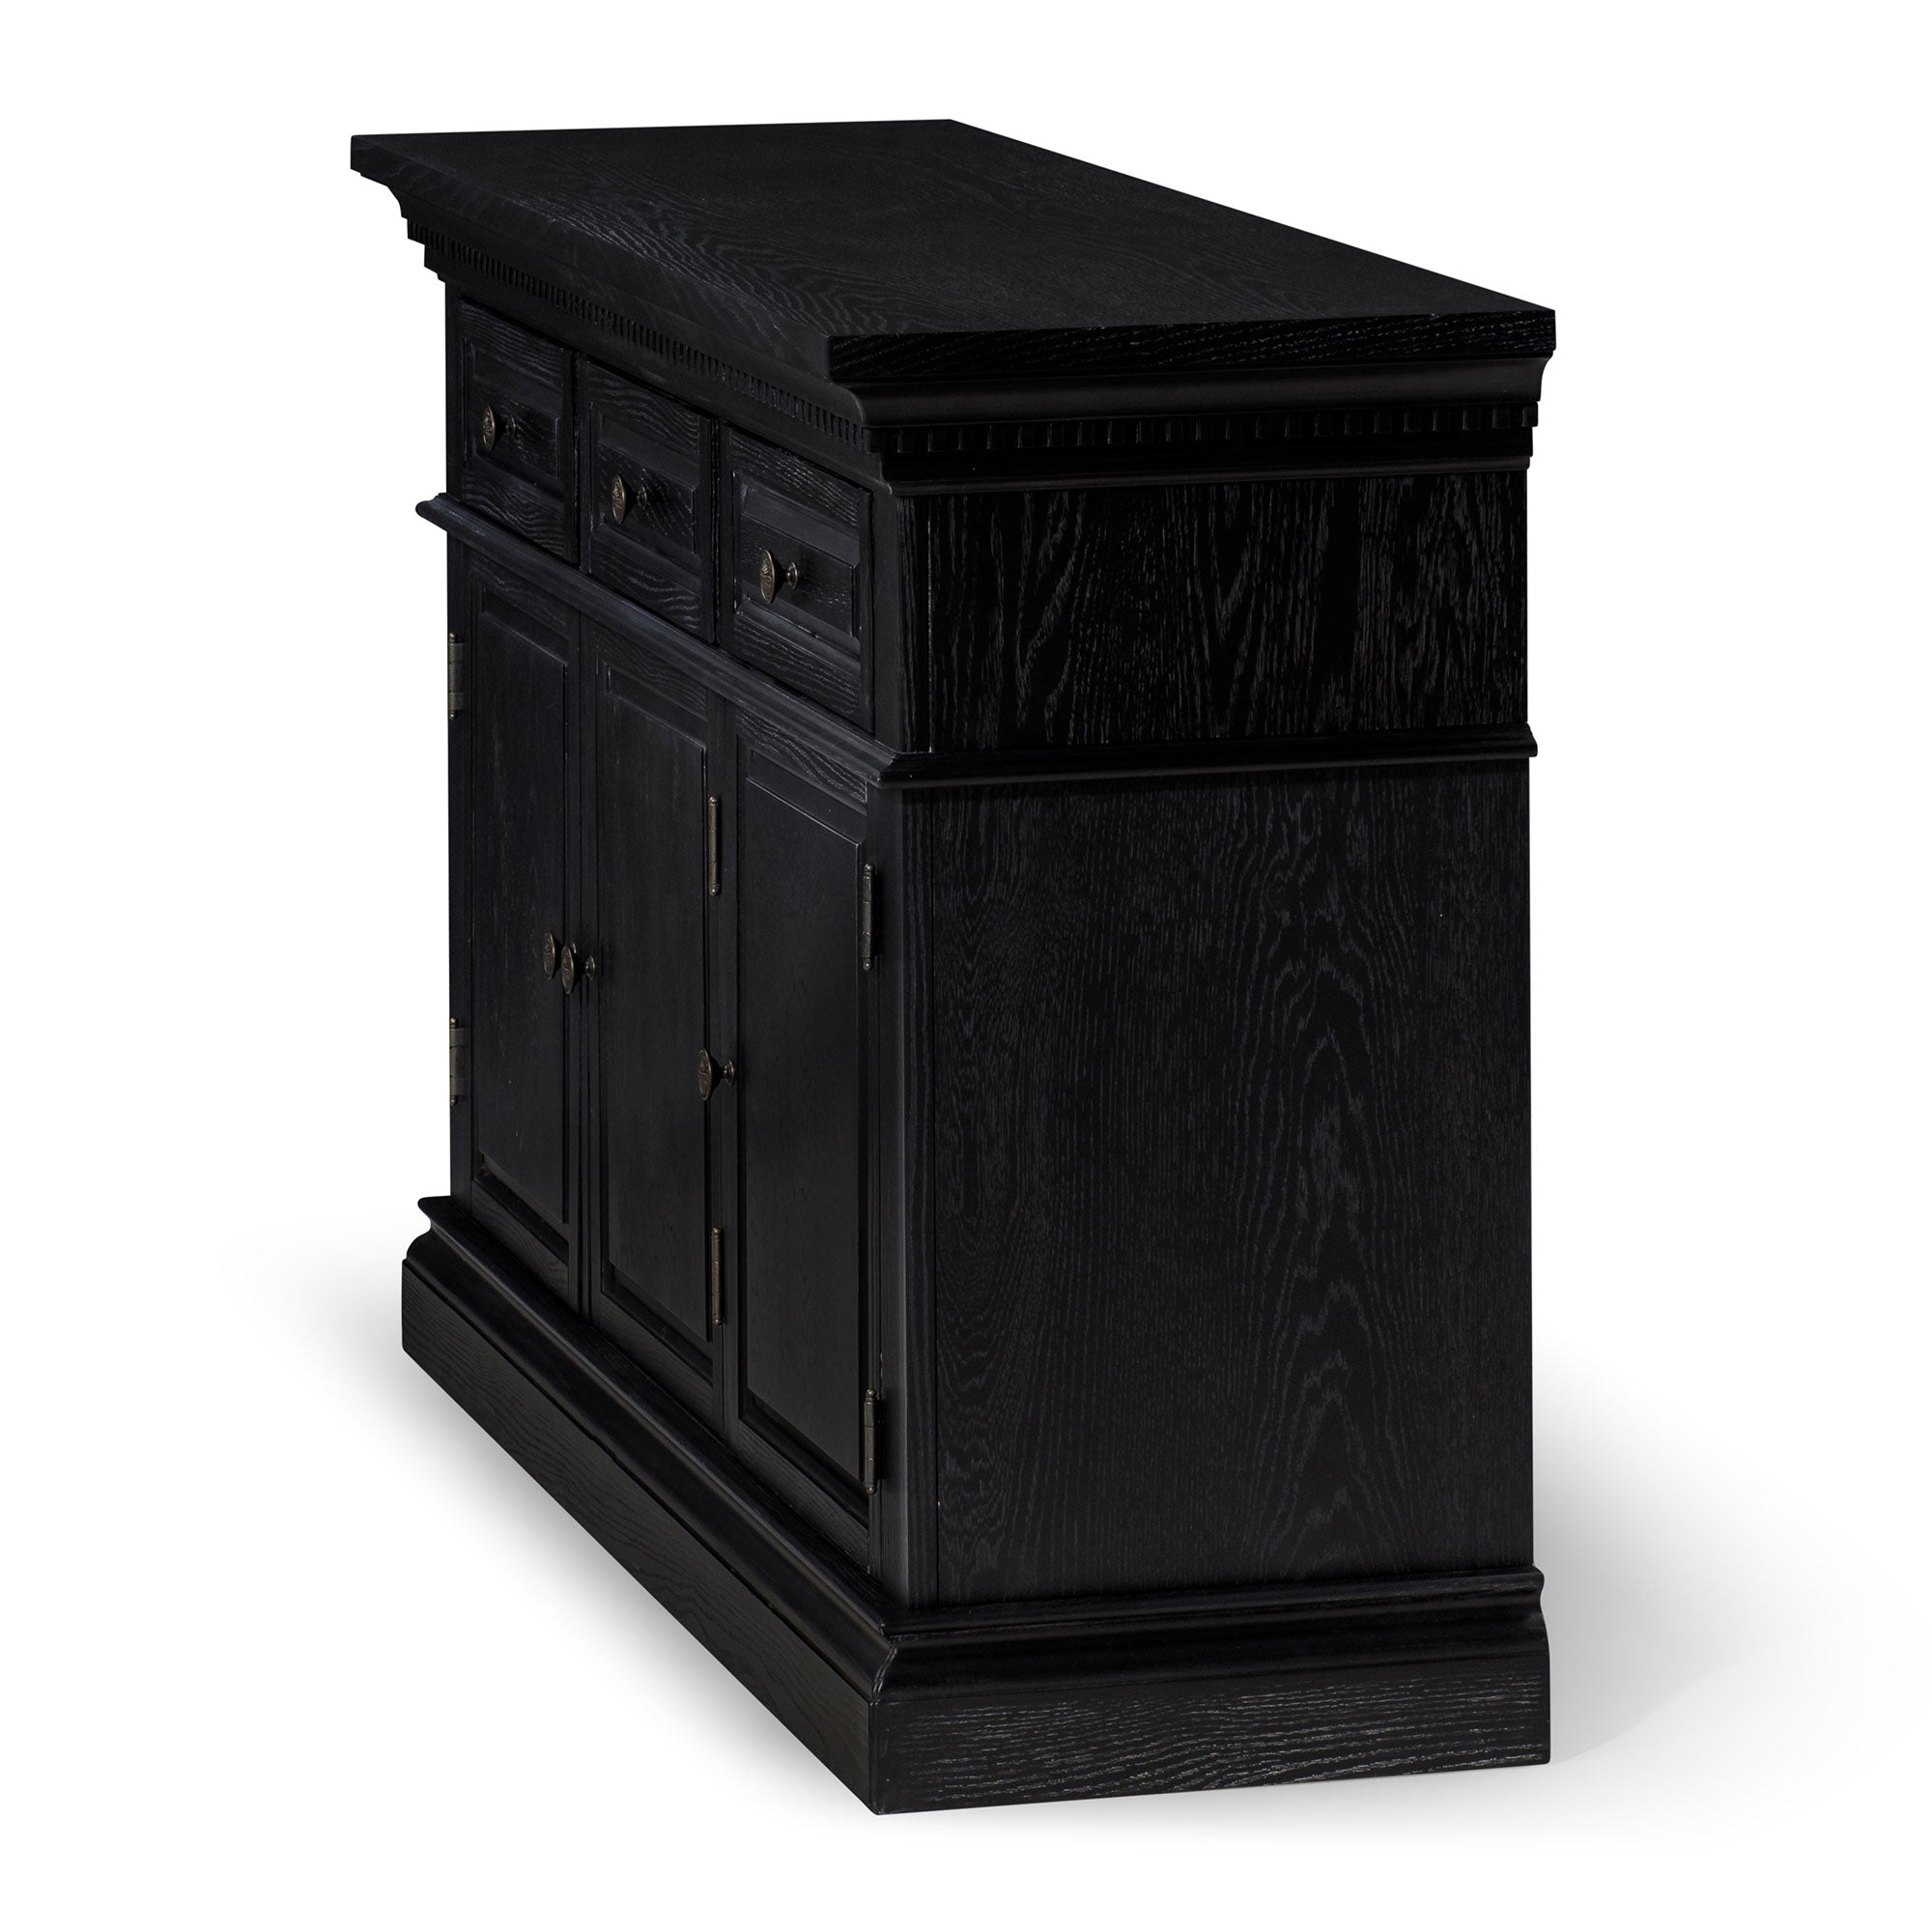 Theo Classical Wooden Sideboard in Antiqued Black Finish in Cabinets by Maven Lane